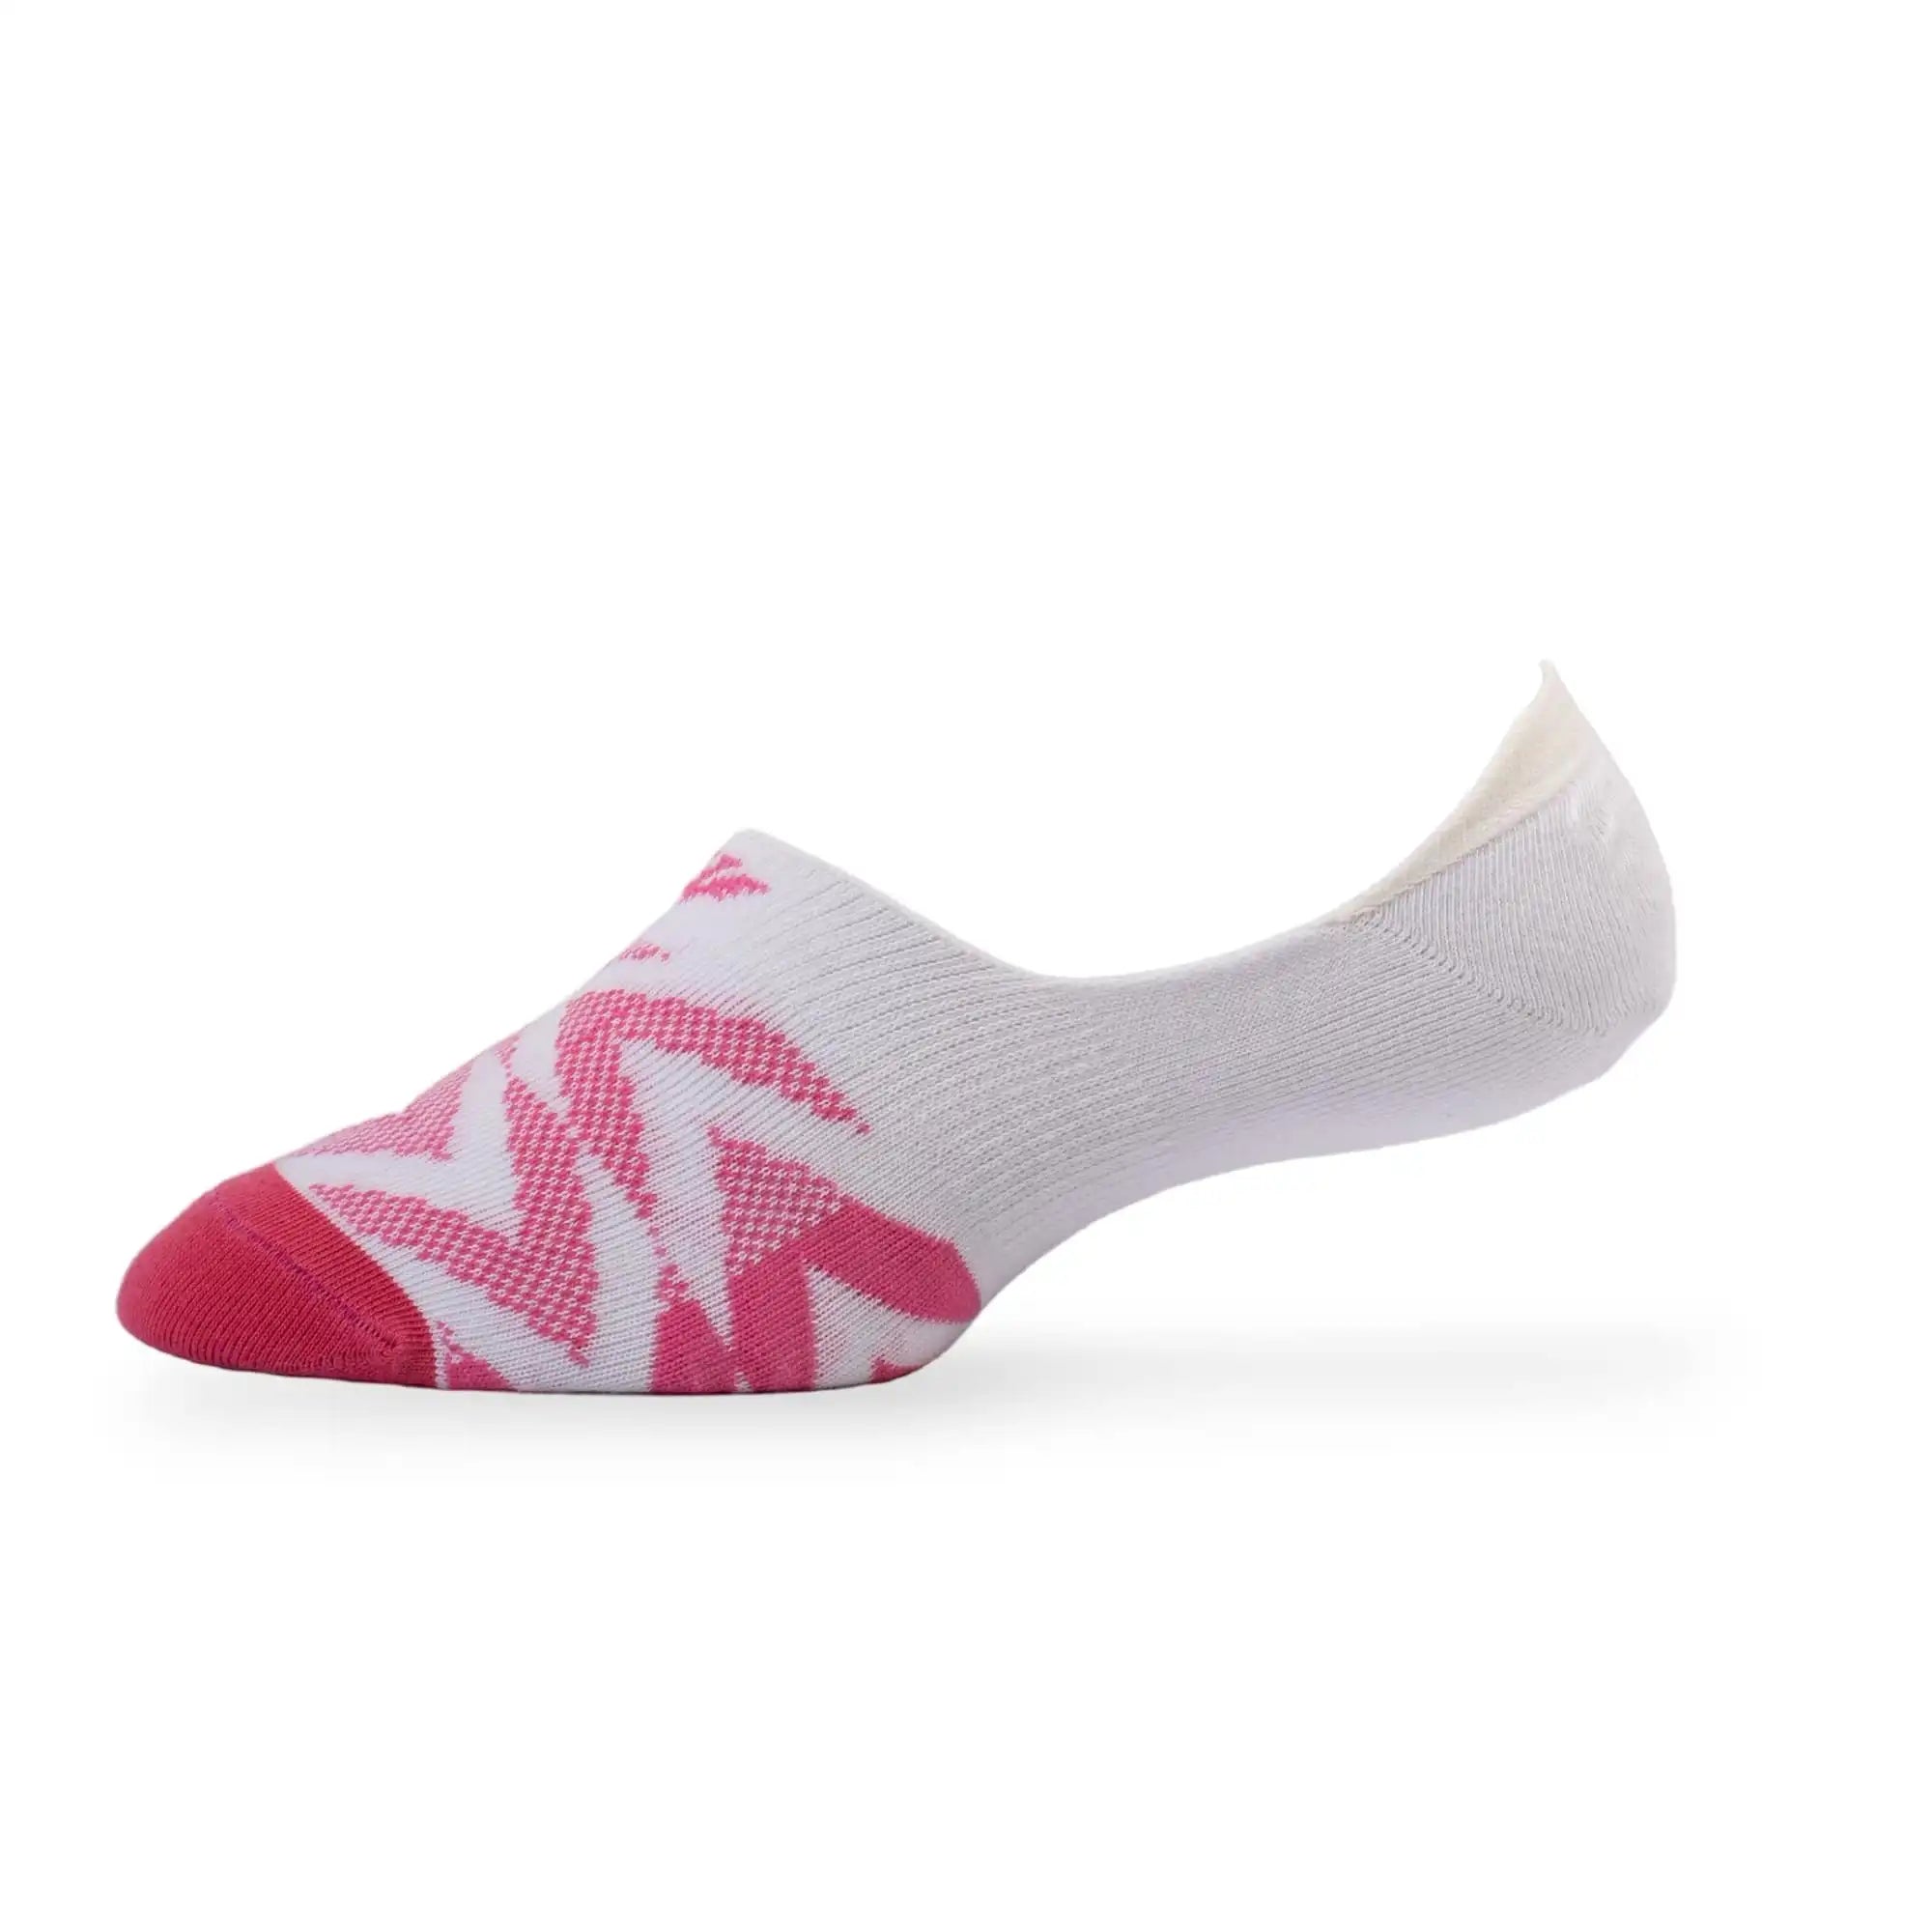 Young Wings Women's Multi Colour Cotton Fabric Design No-Show Socks - Pack of 5, Style no. 9013-W1